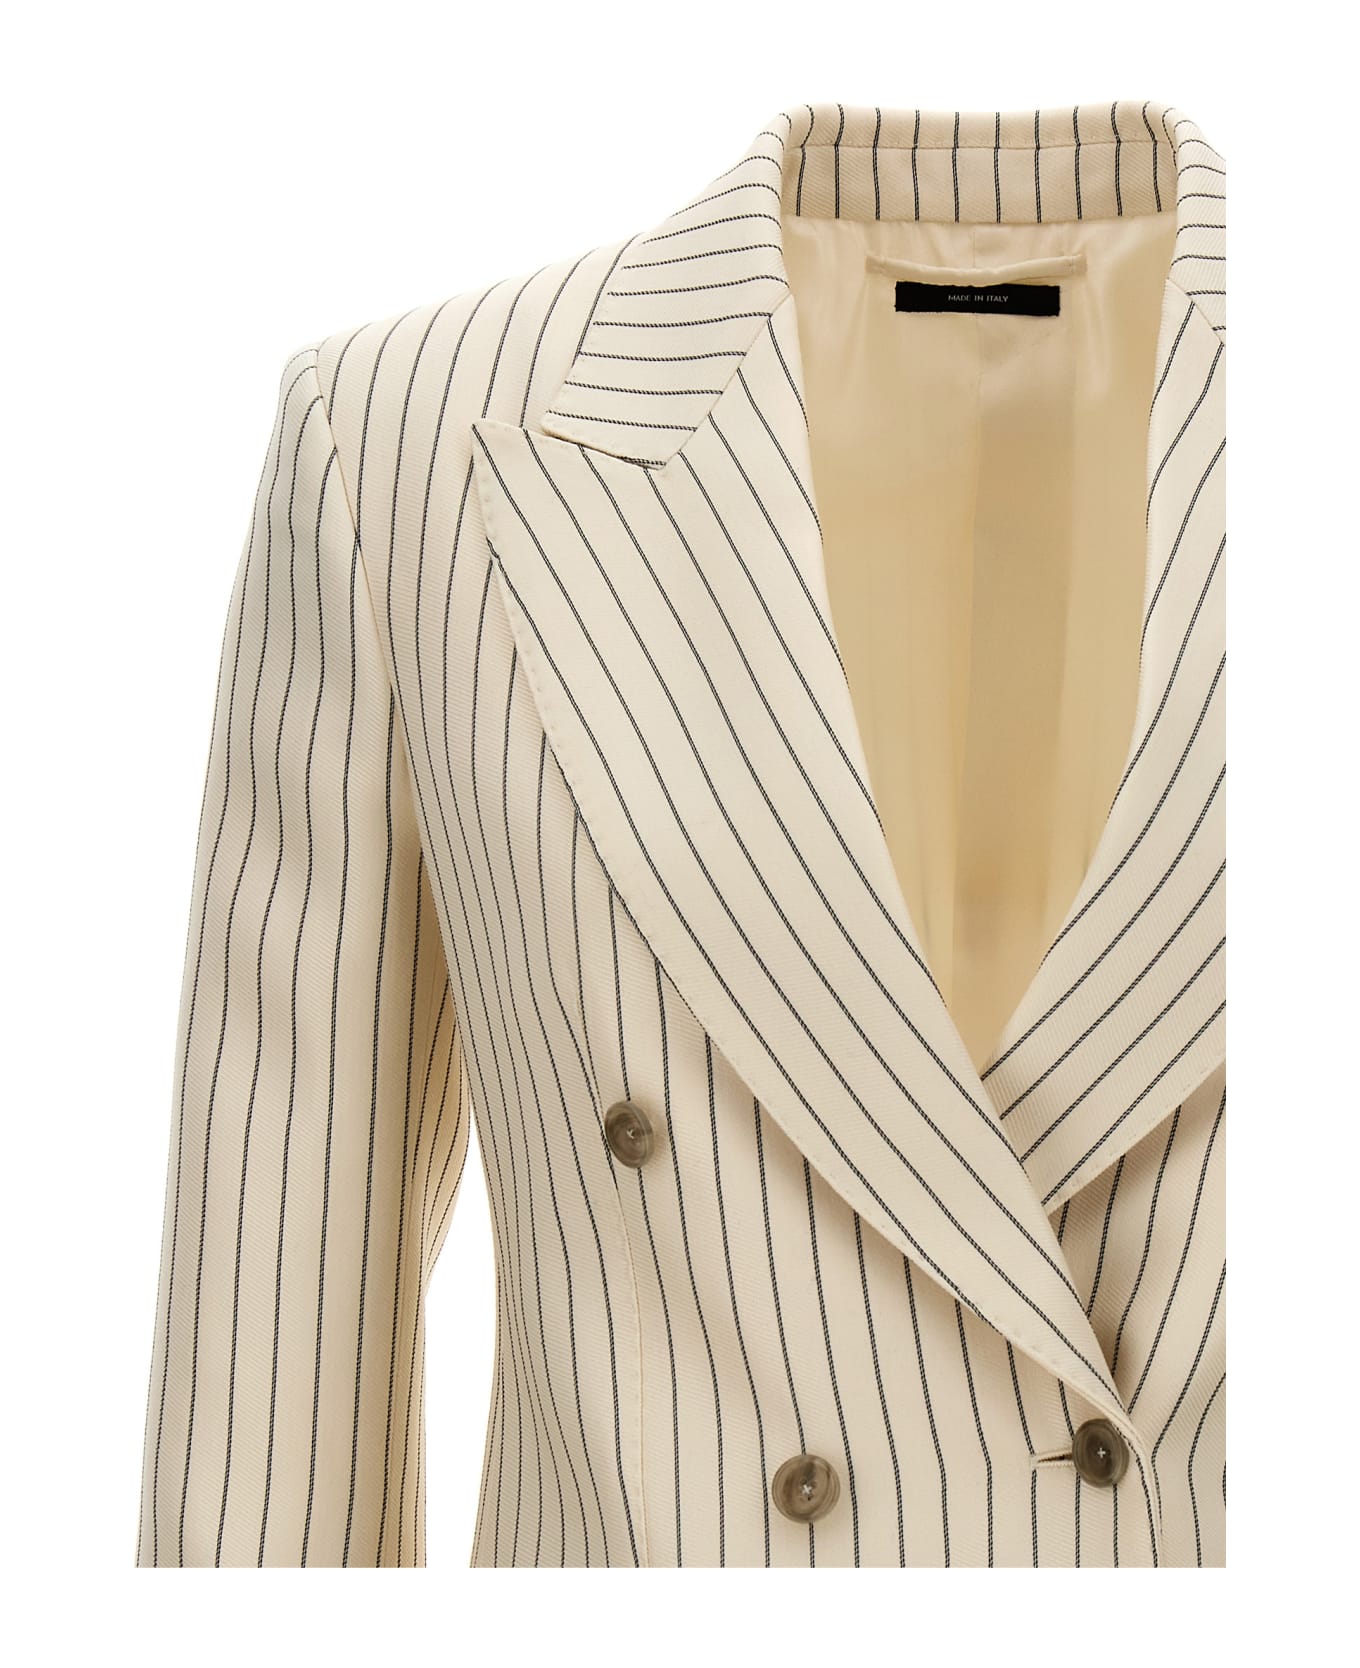 Tom Ford Striped Double-breasted Blazer - White/Black ブレザー